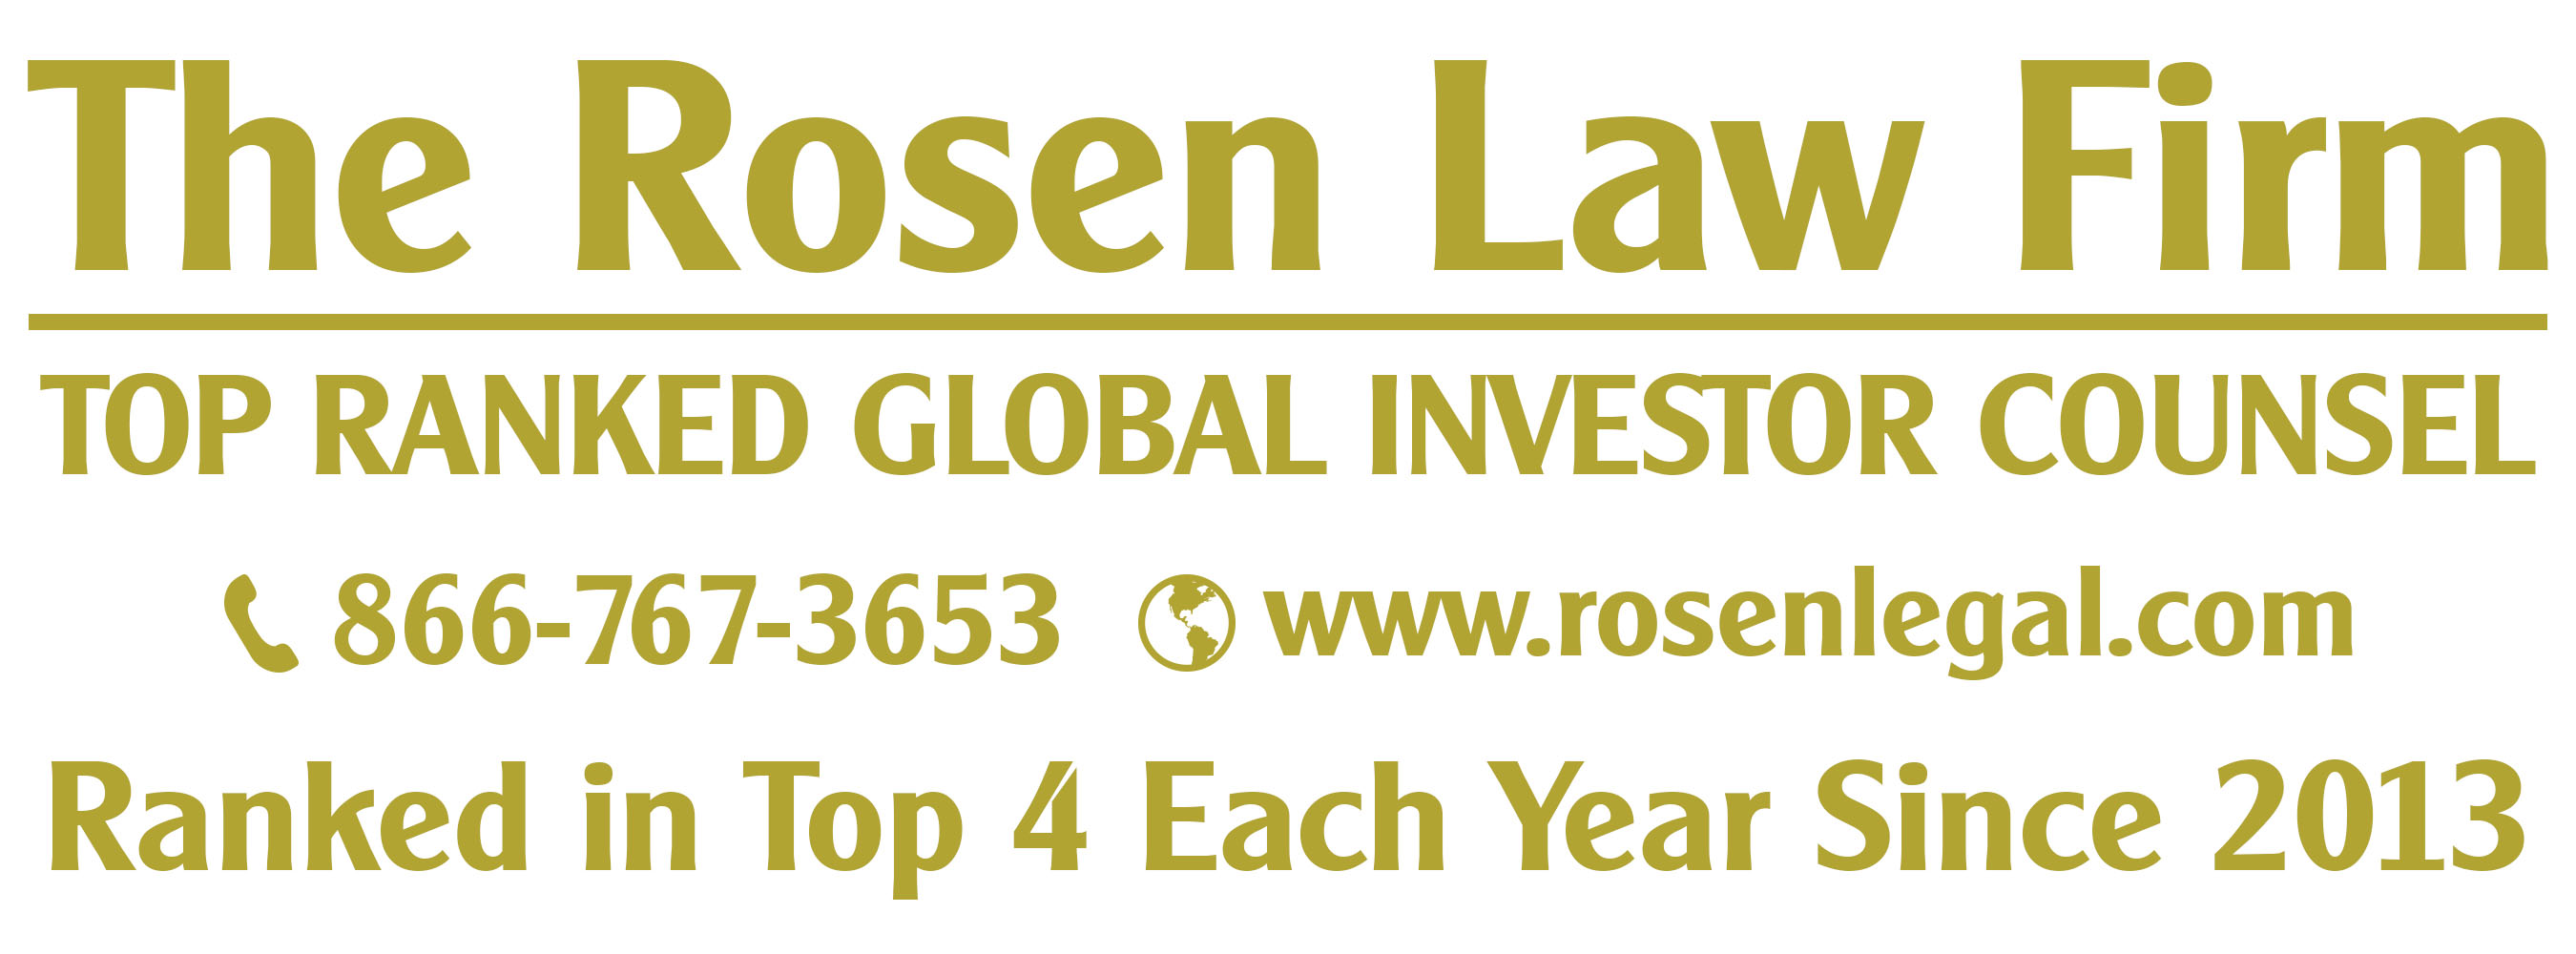 Rosen Law Firm PA, Thursday, January 12, 2023, Press release picture